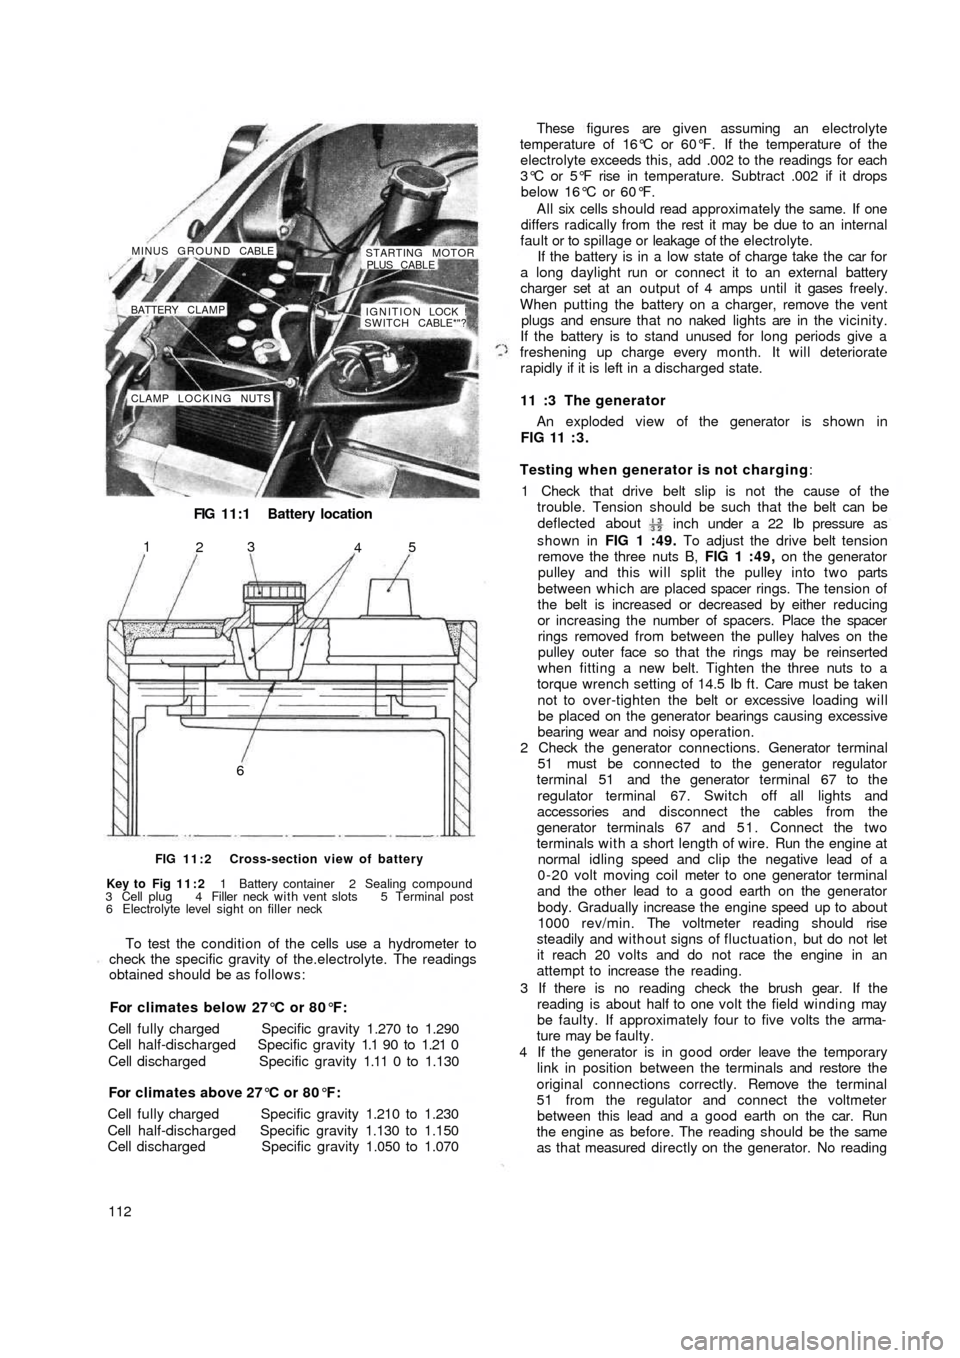 FIAT 500 1961 1.G Owners Guide FIG 11:1 Battery location
CLAMP LOCKING NUTSIGNITION LOCK !
SWITCH CABLE*"? BATTERY CLAMP MINUS GROUND CABLE
STARTING MOTOR
PLUS CABLE
65
4 3
2 1
FIG 11:2 Cross-section view of battery
Key to  Fig  11